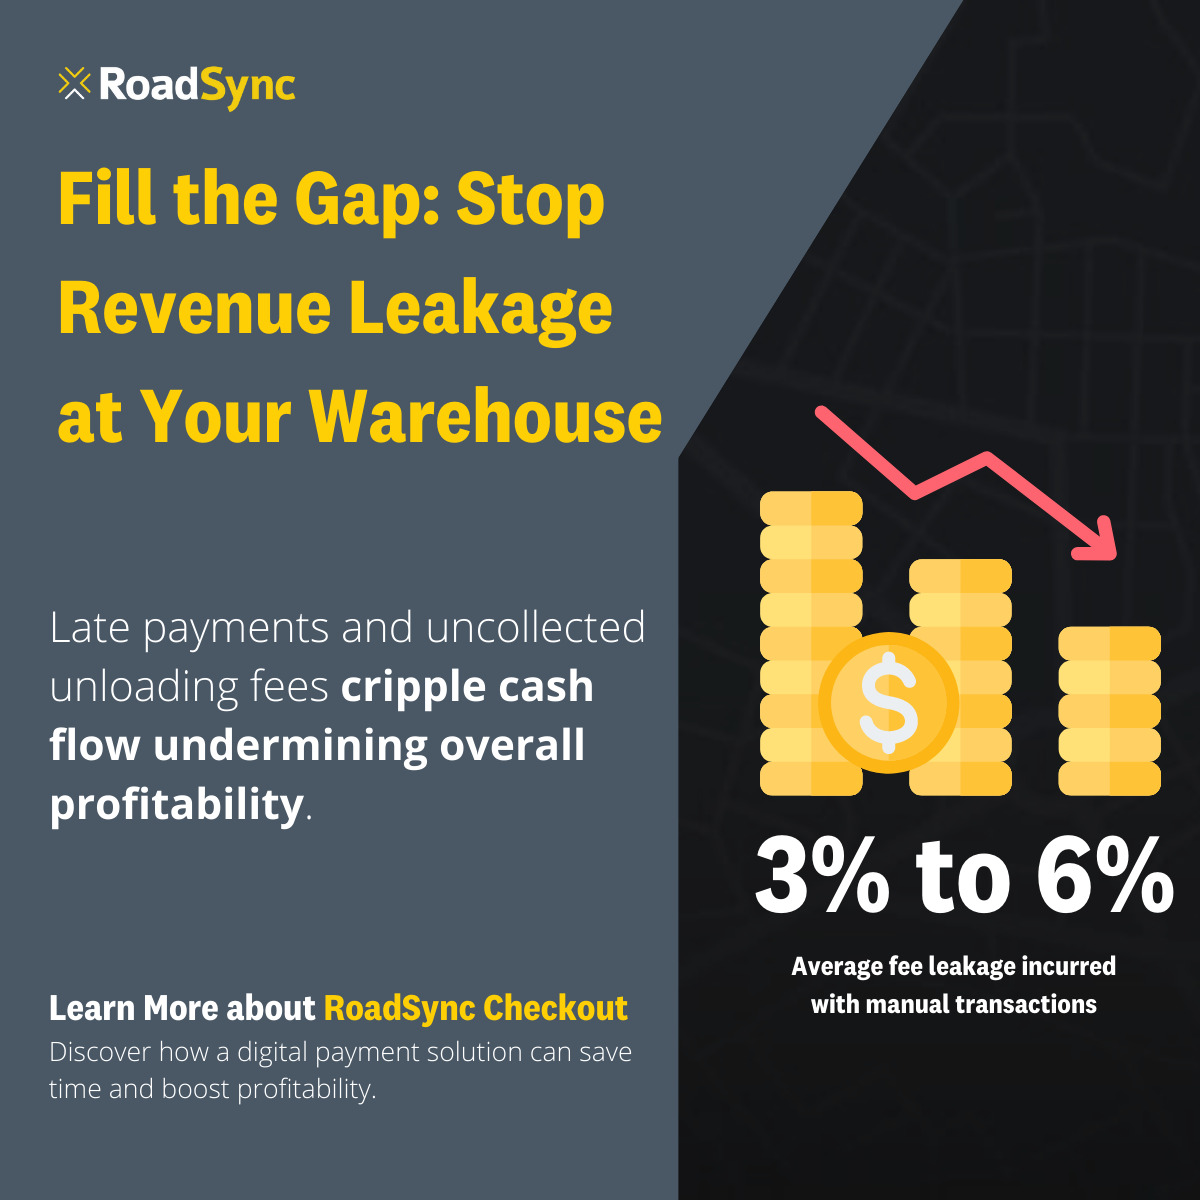 stop revenue leakage at cold storage warehouse by moving to digital payment platform